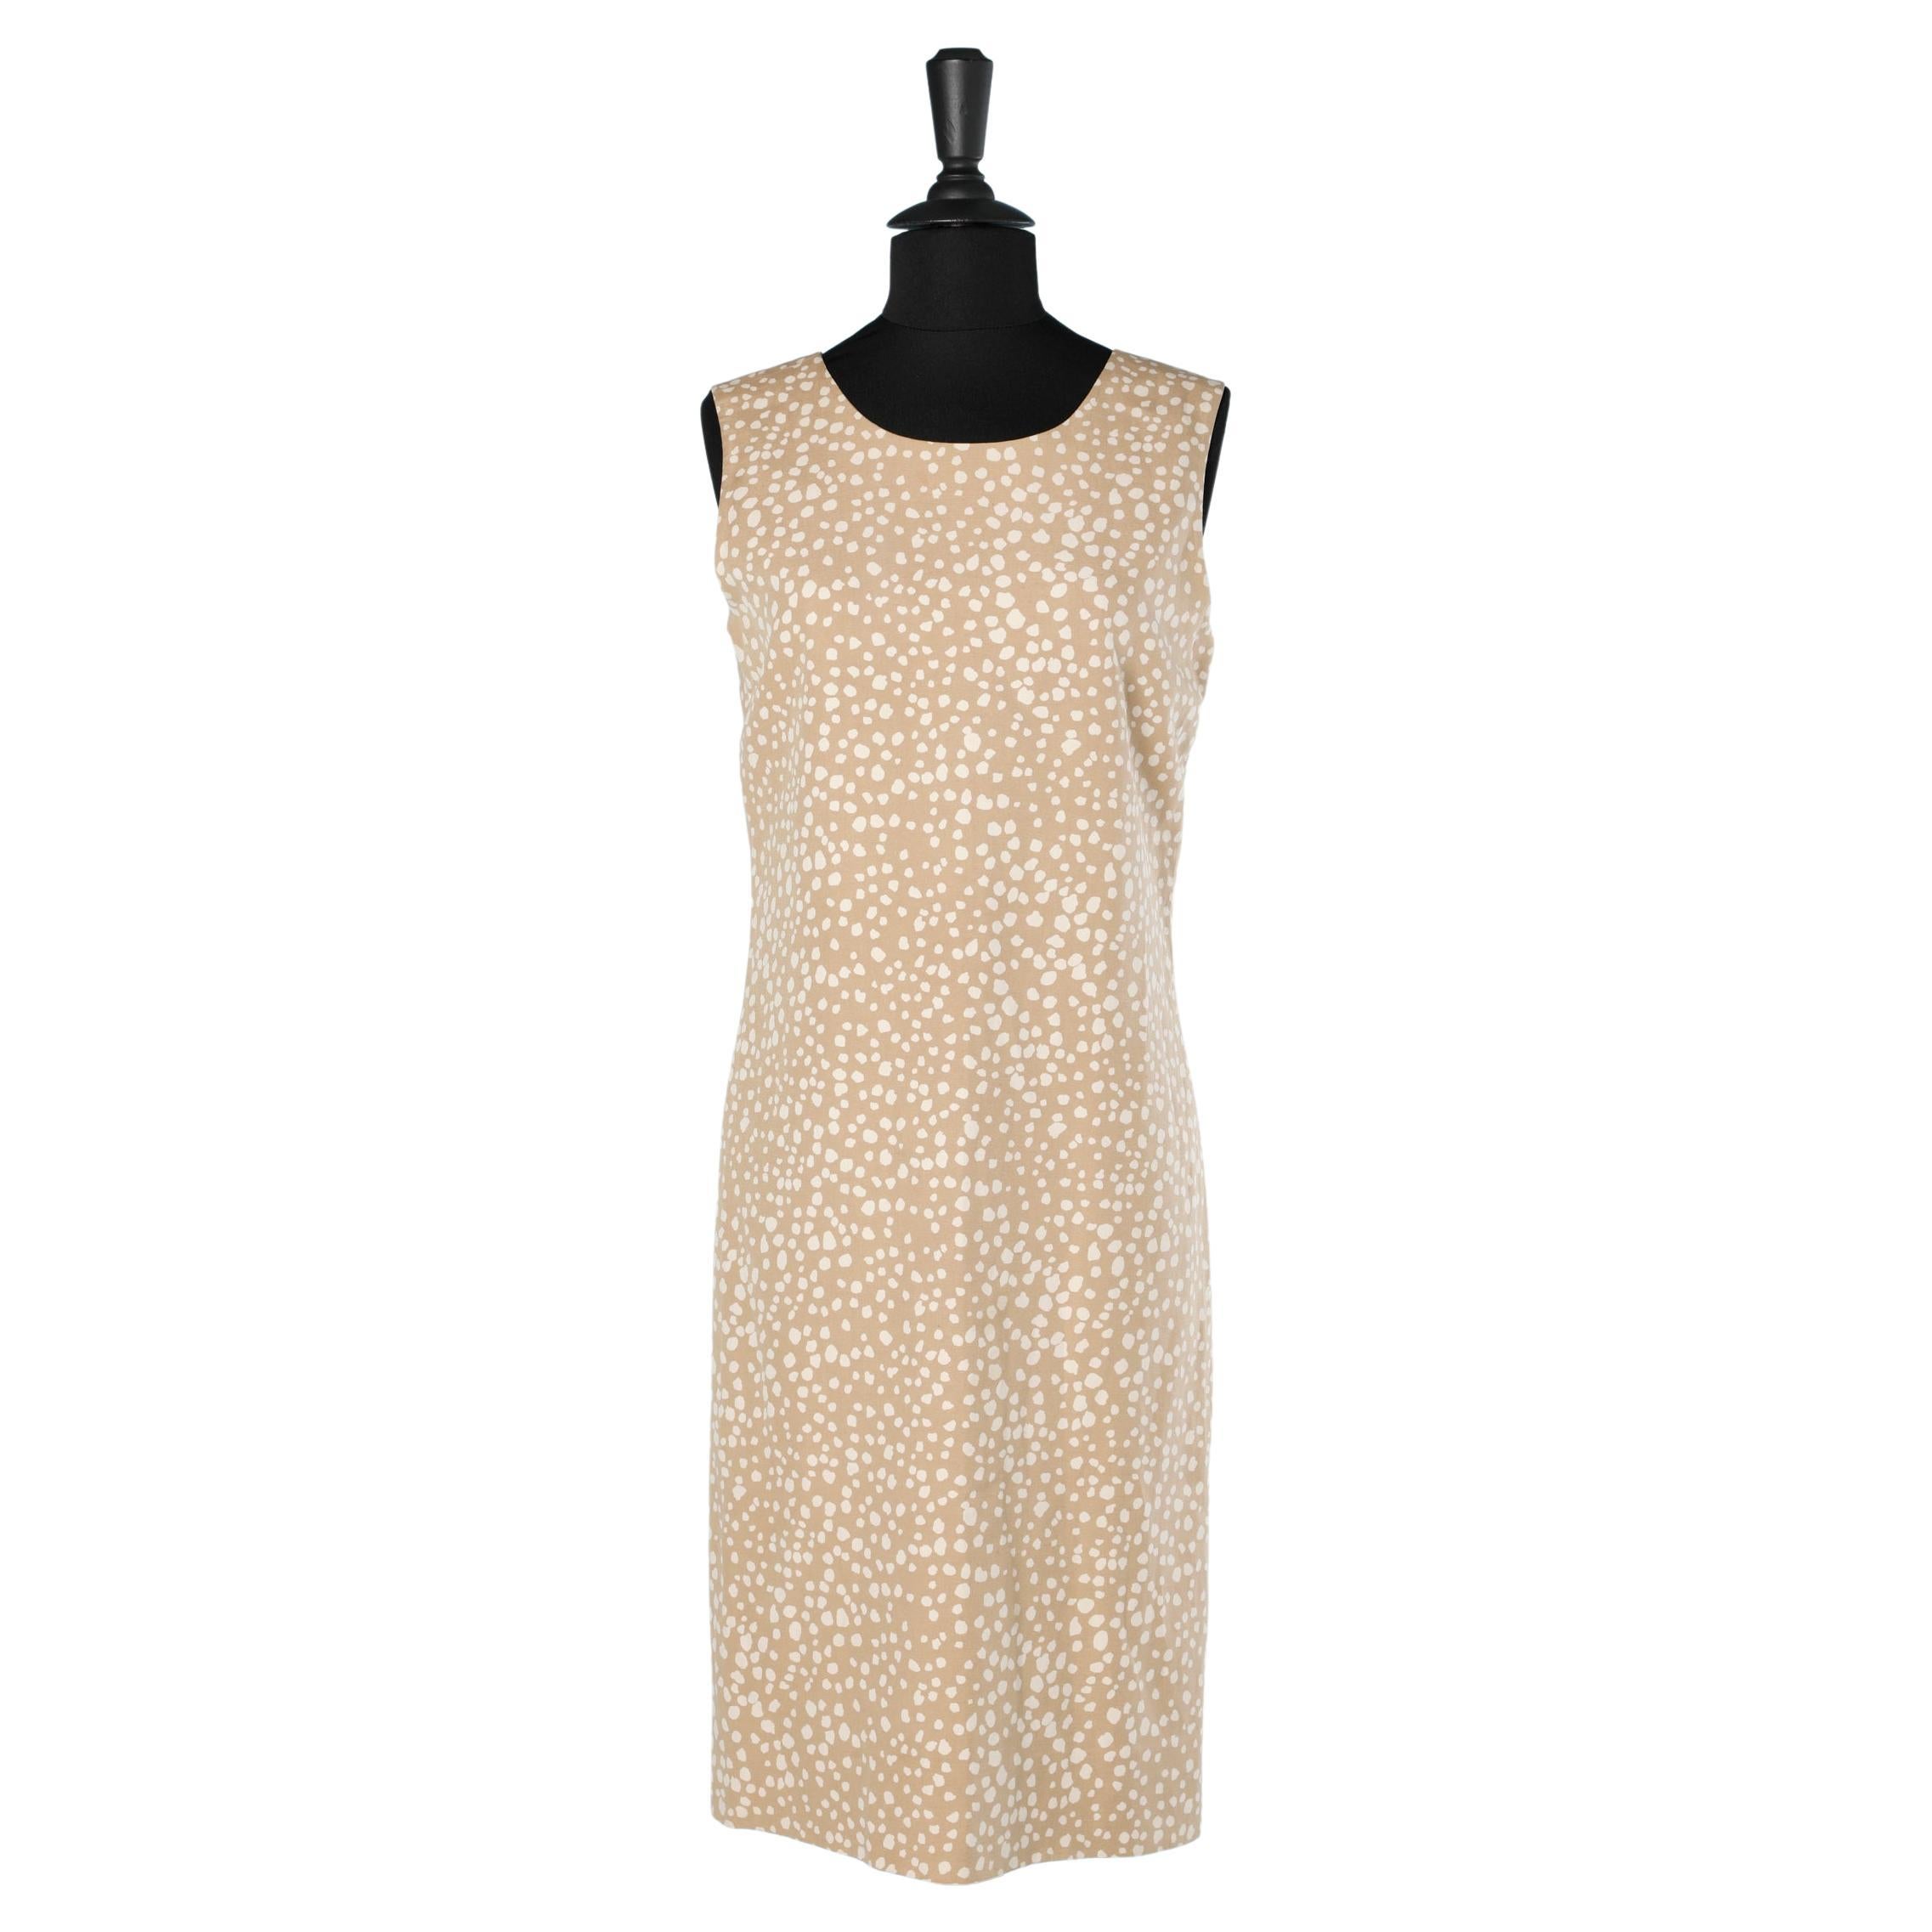  Beige spotted ivory silk and linen day dress Yves Saint Laurent Rive Gauche  For Sale